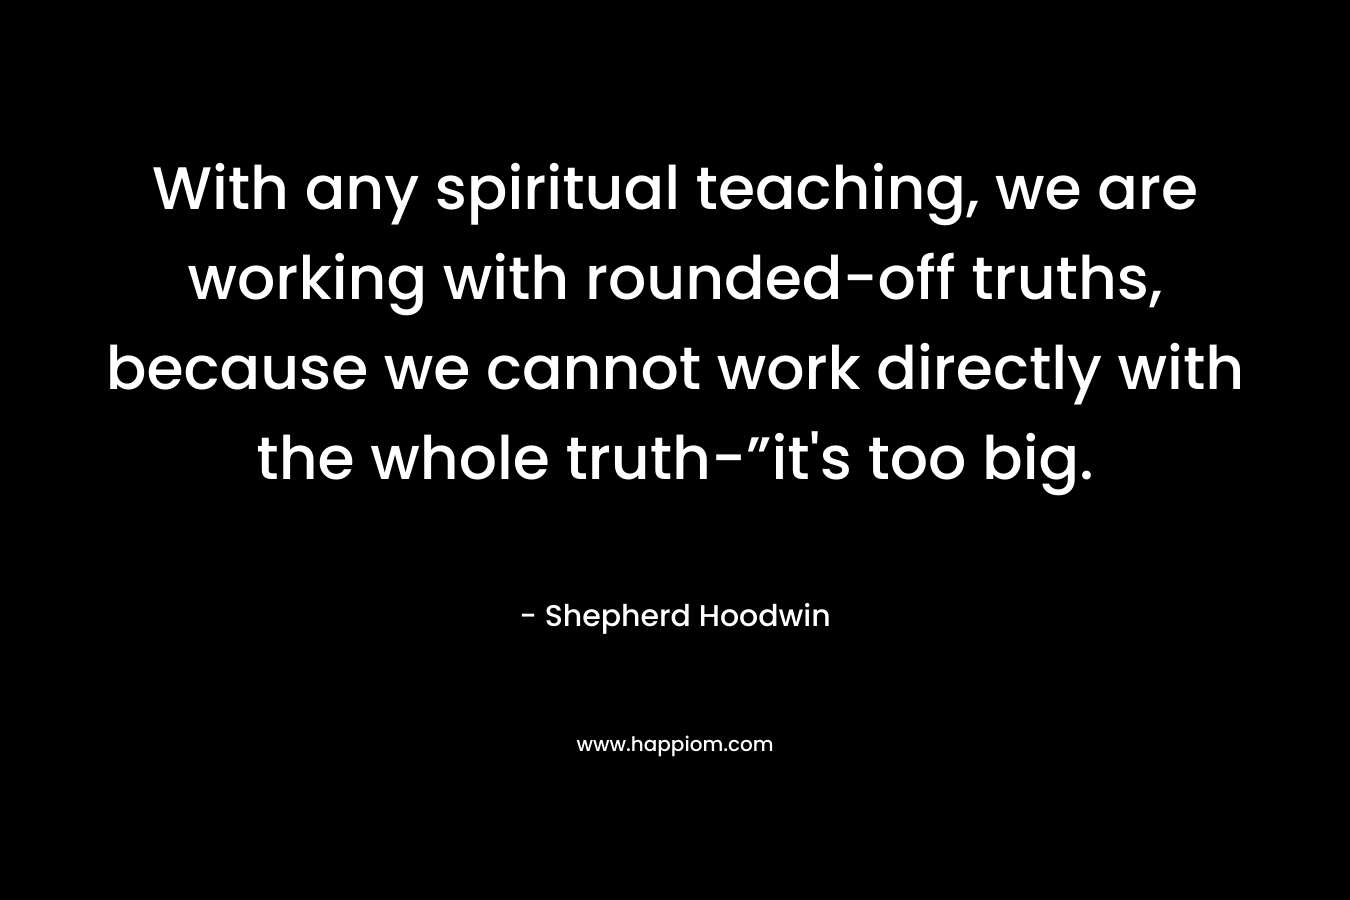 With any spiritual teaching, we are working with rounded-off truths, because we cannot work directly with the whole truth-”it's too big.